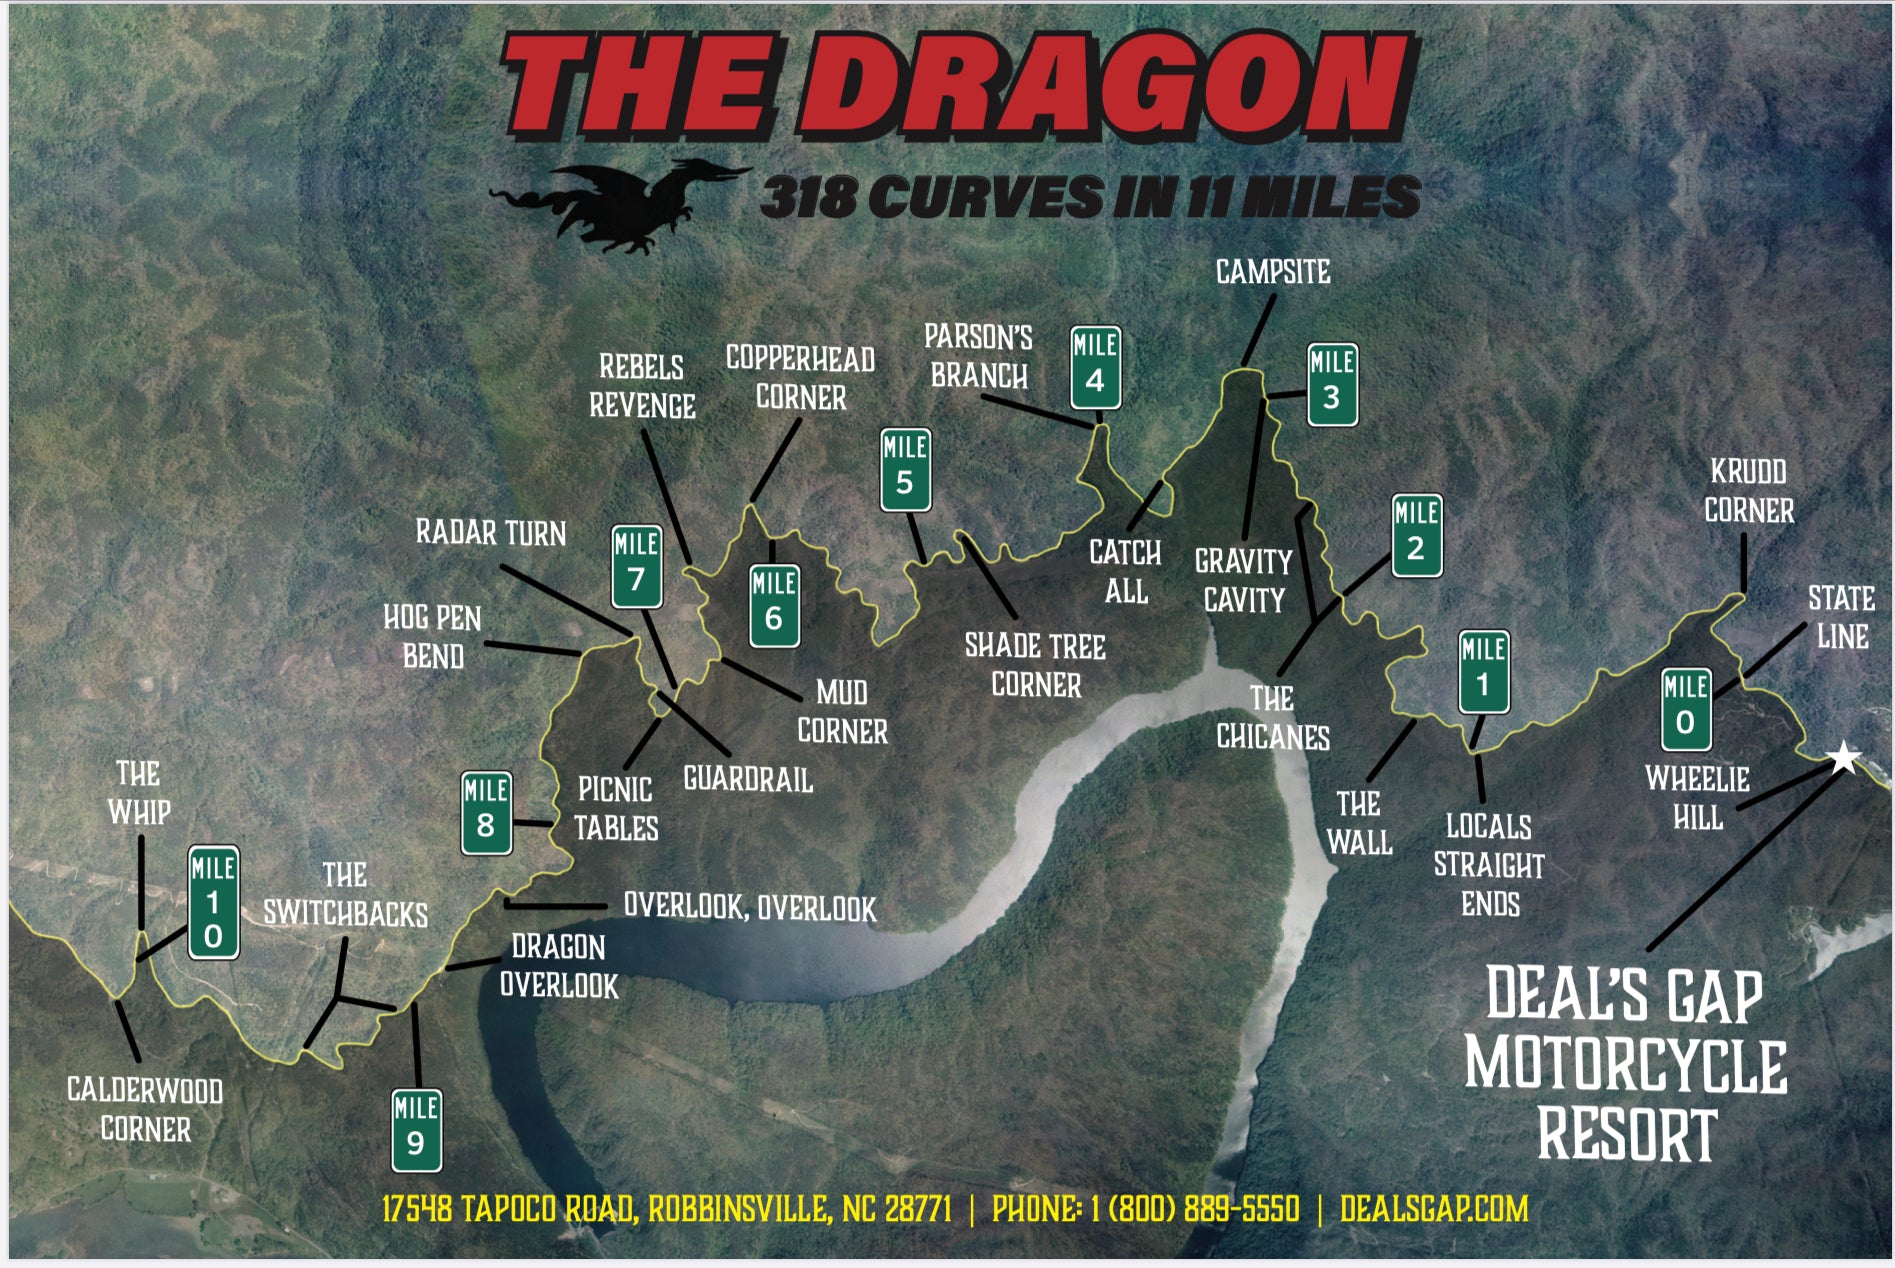 Dragon Poster - aerial view